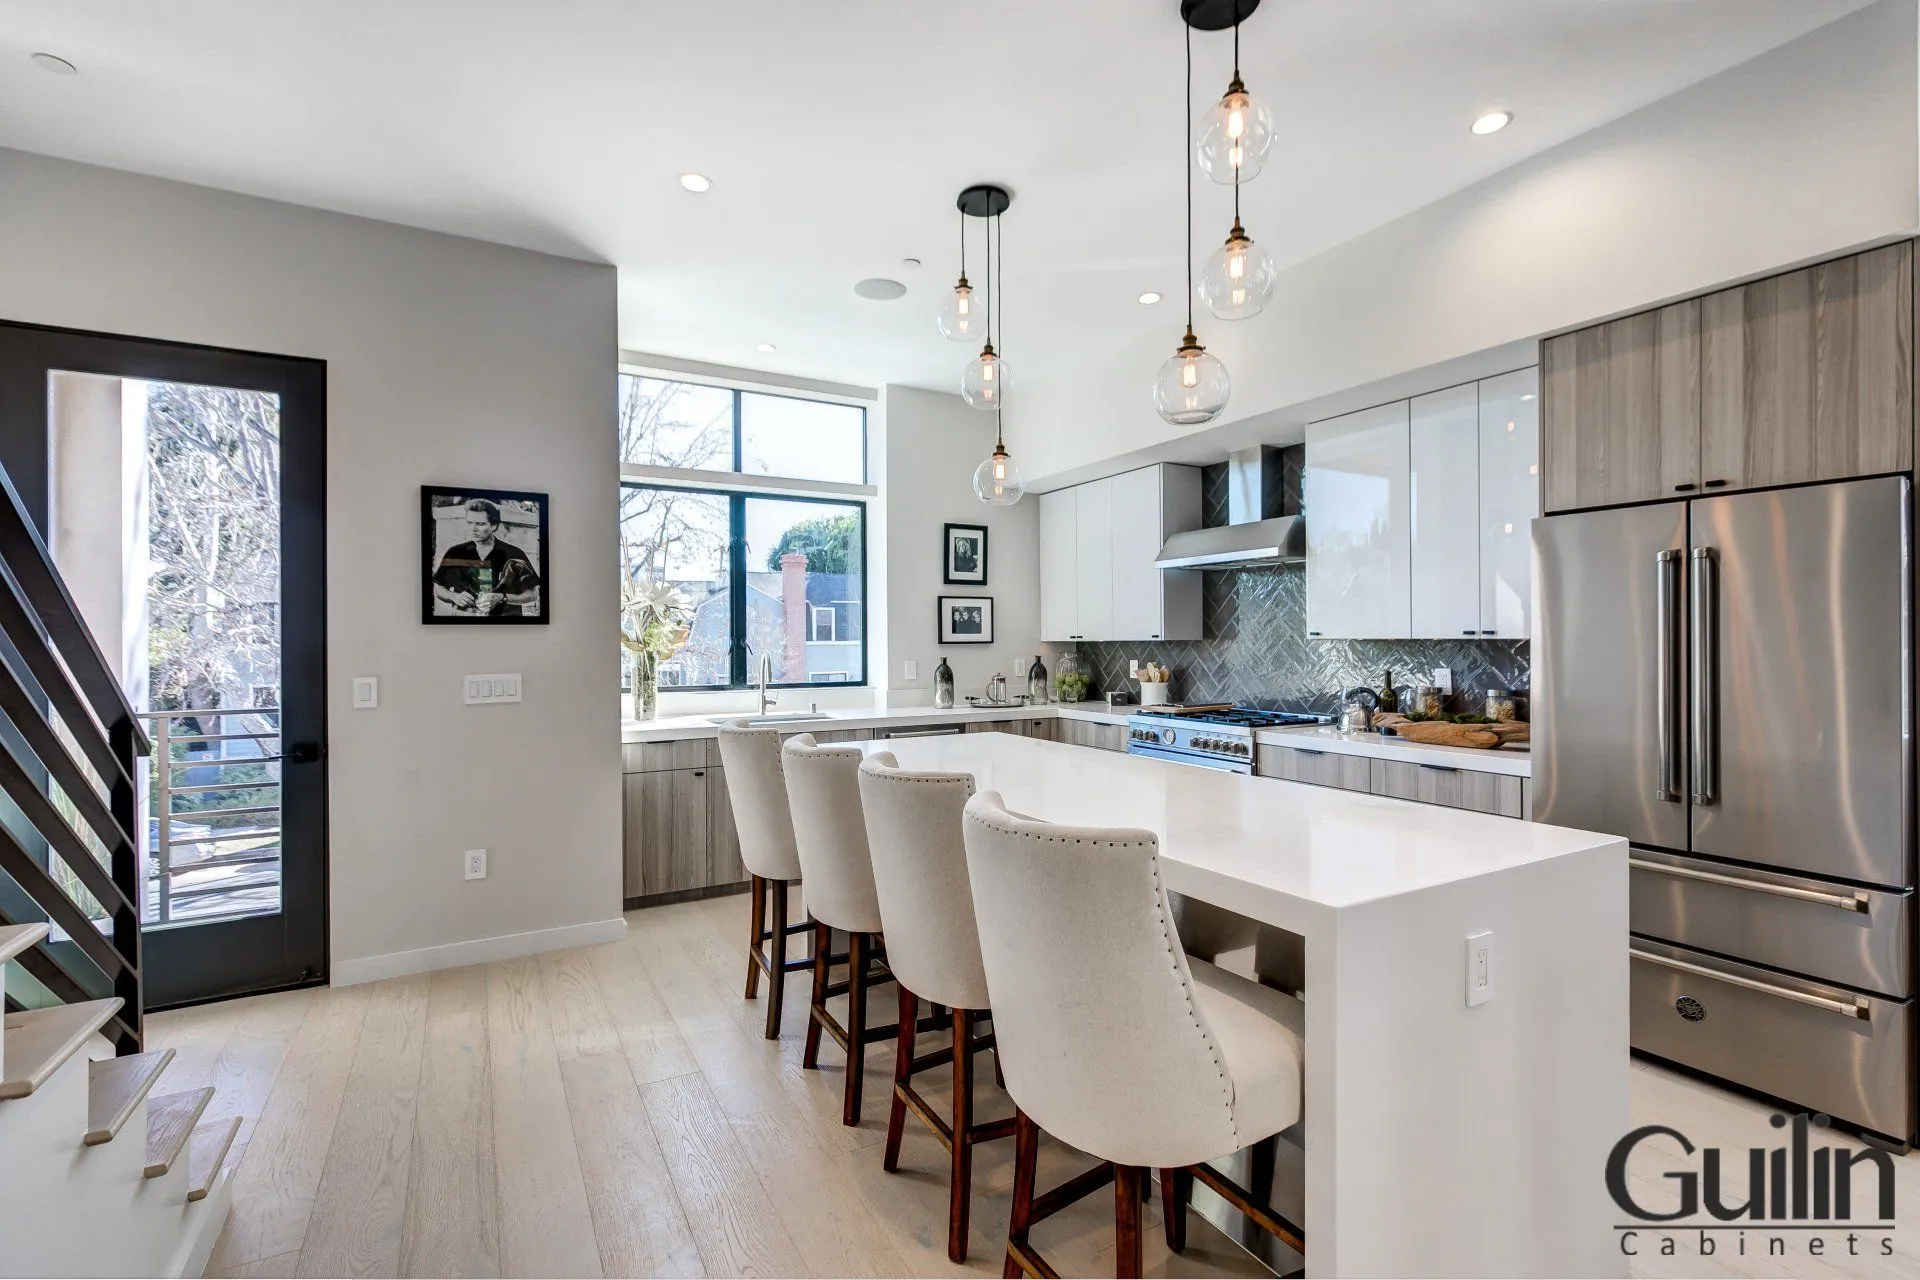 Contemporary kitchen style is all about function over form, focusing on modern appliances, smart home devices, and electronic gadgets... This Style is a popular choice for many homeowners due to its modern and sleek appearance.